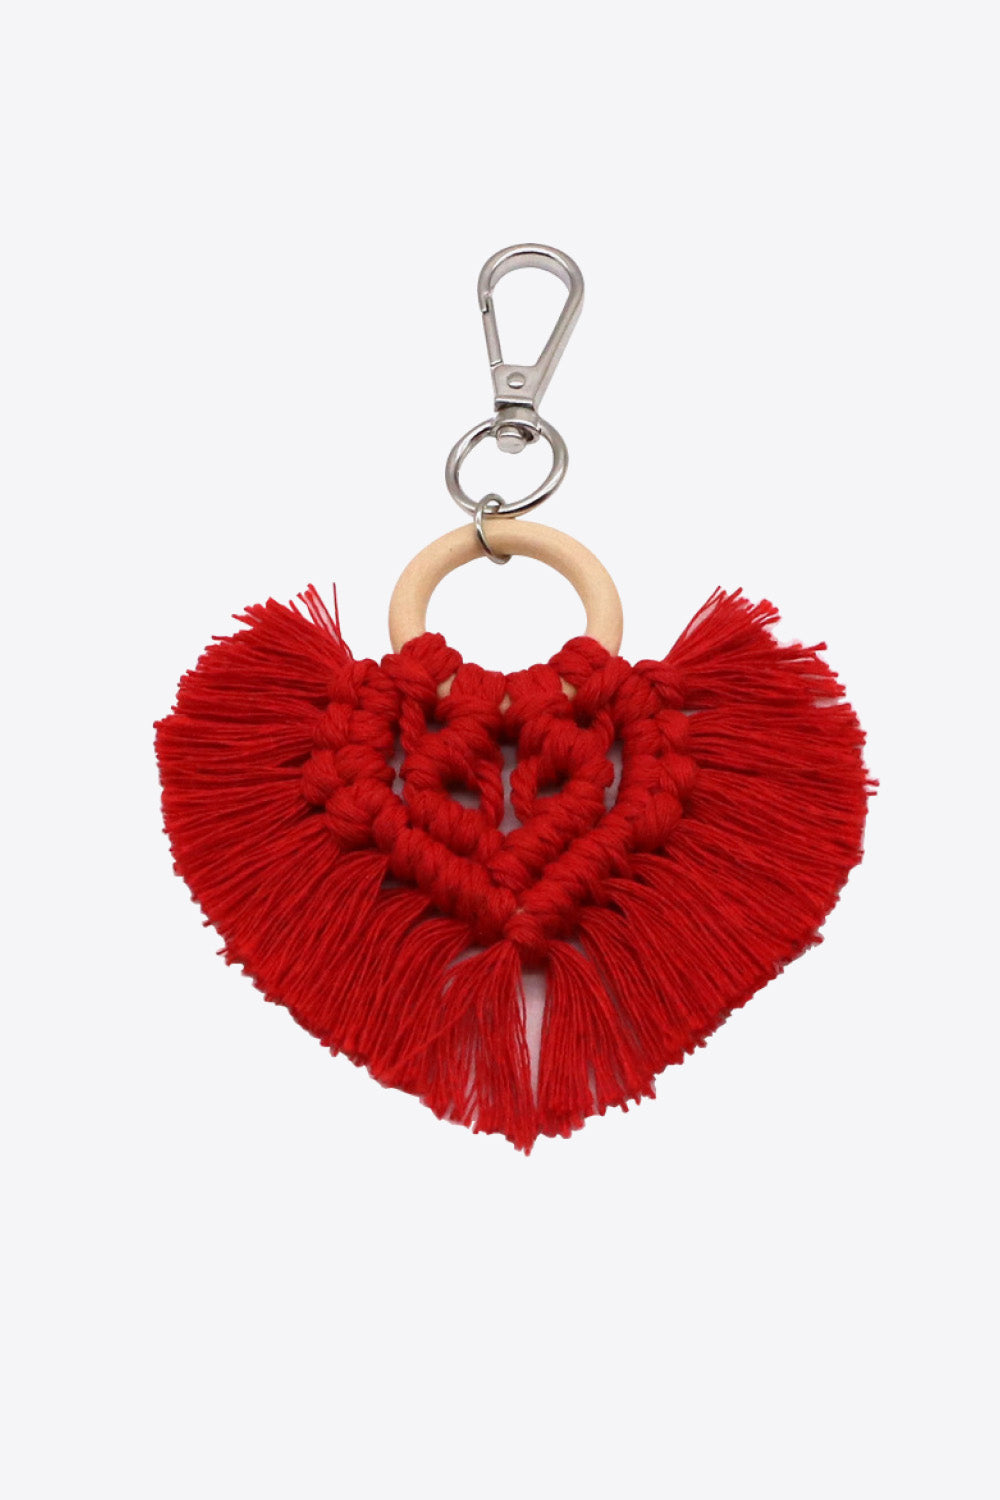 Trendsi Cupid Beauty Supplies Deep Red / One Size Keychains Assorted 4-Pack Heart-Shaped Macrame Fringe Keychain